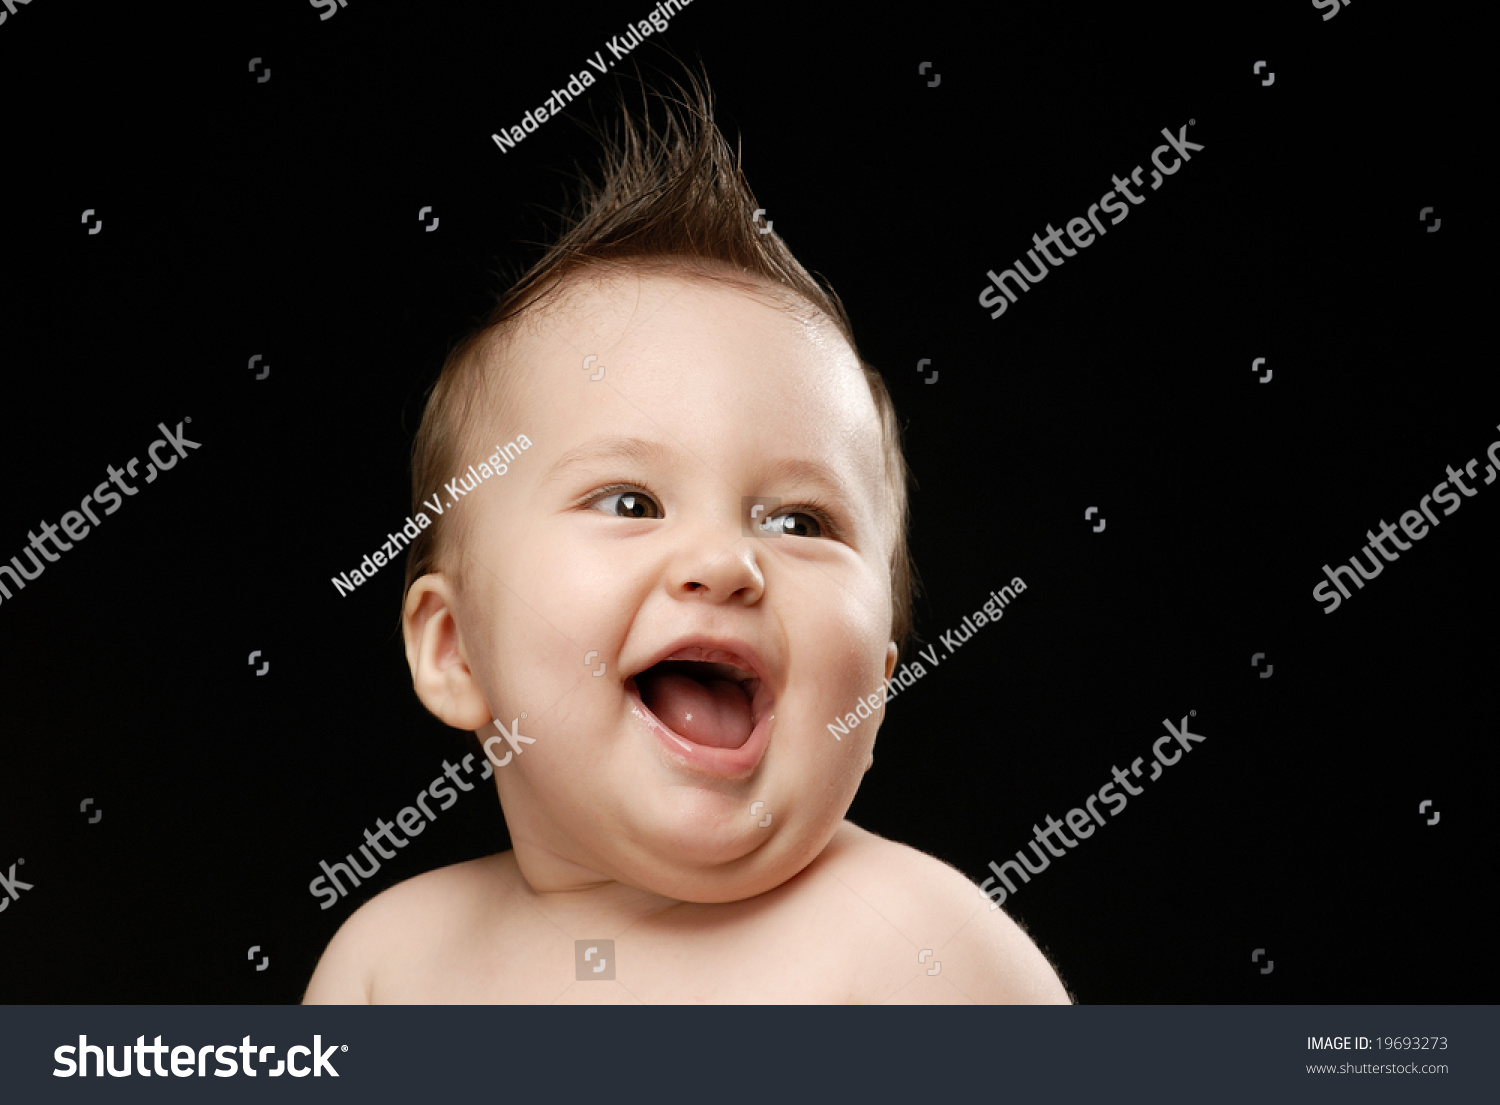 Closeup Baby Looking Sideways Laughing Stock Photo 19693273 Shutterstock